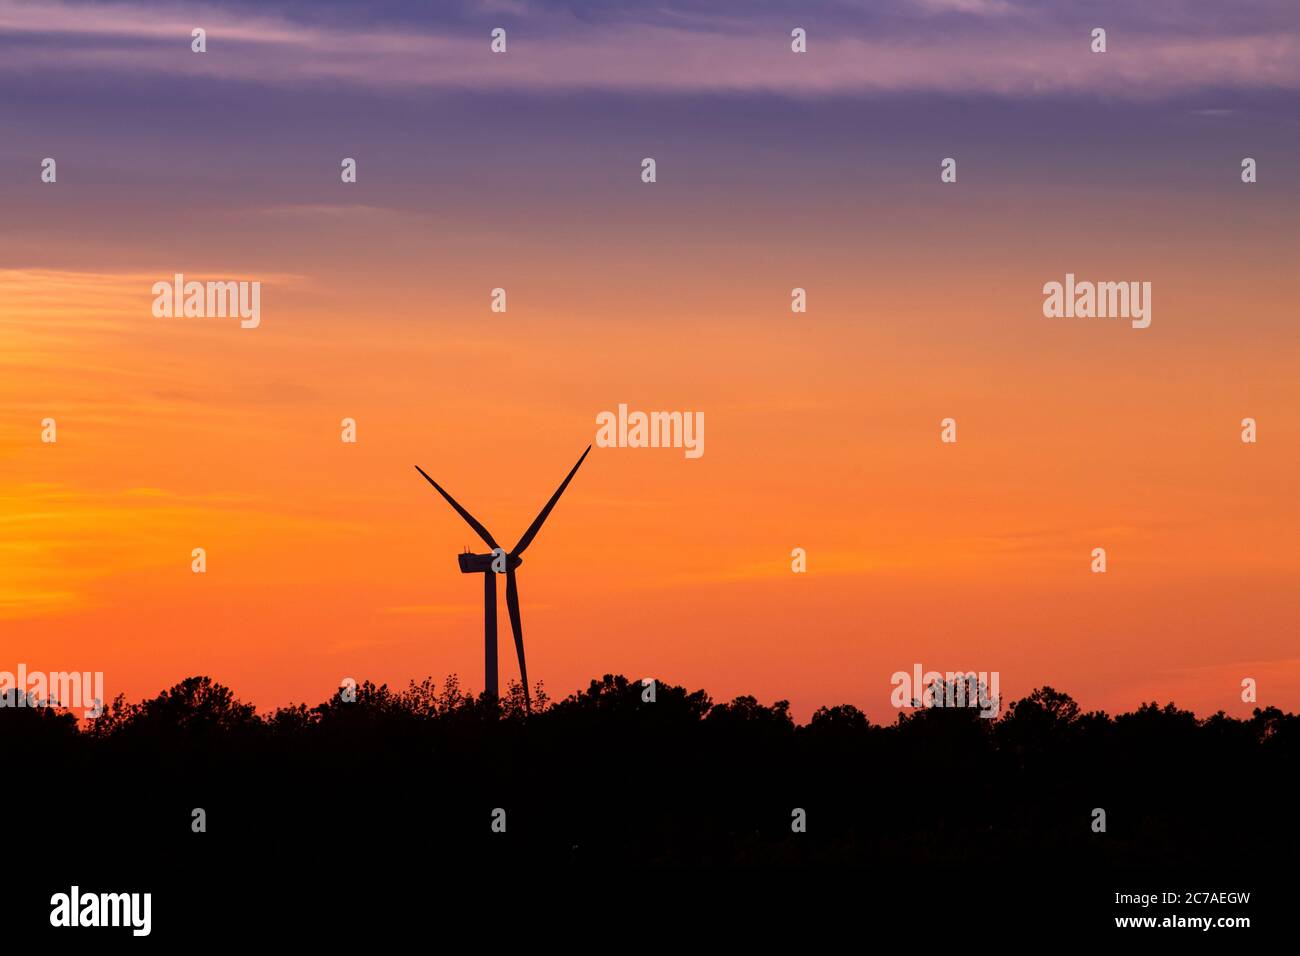 Silhouette of wind turbine at sunset, Delaware USA Stock Photo